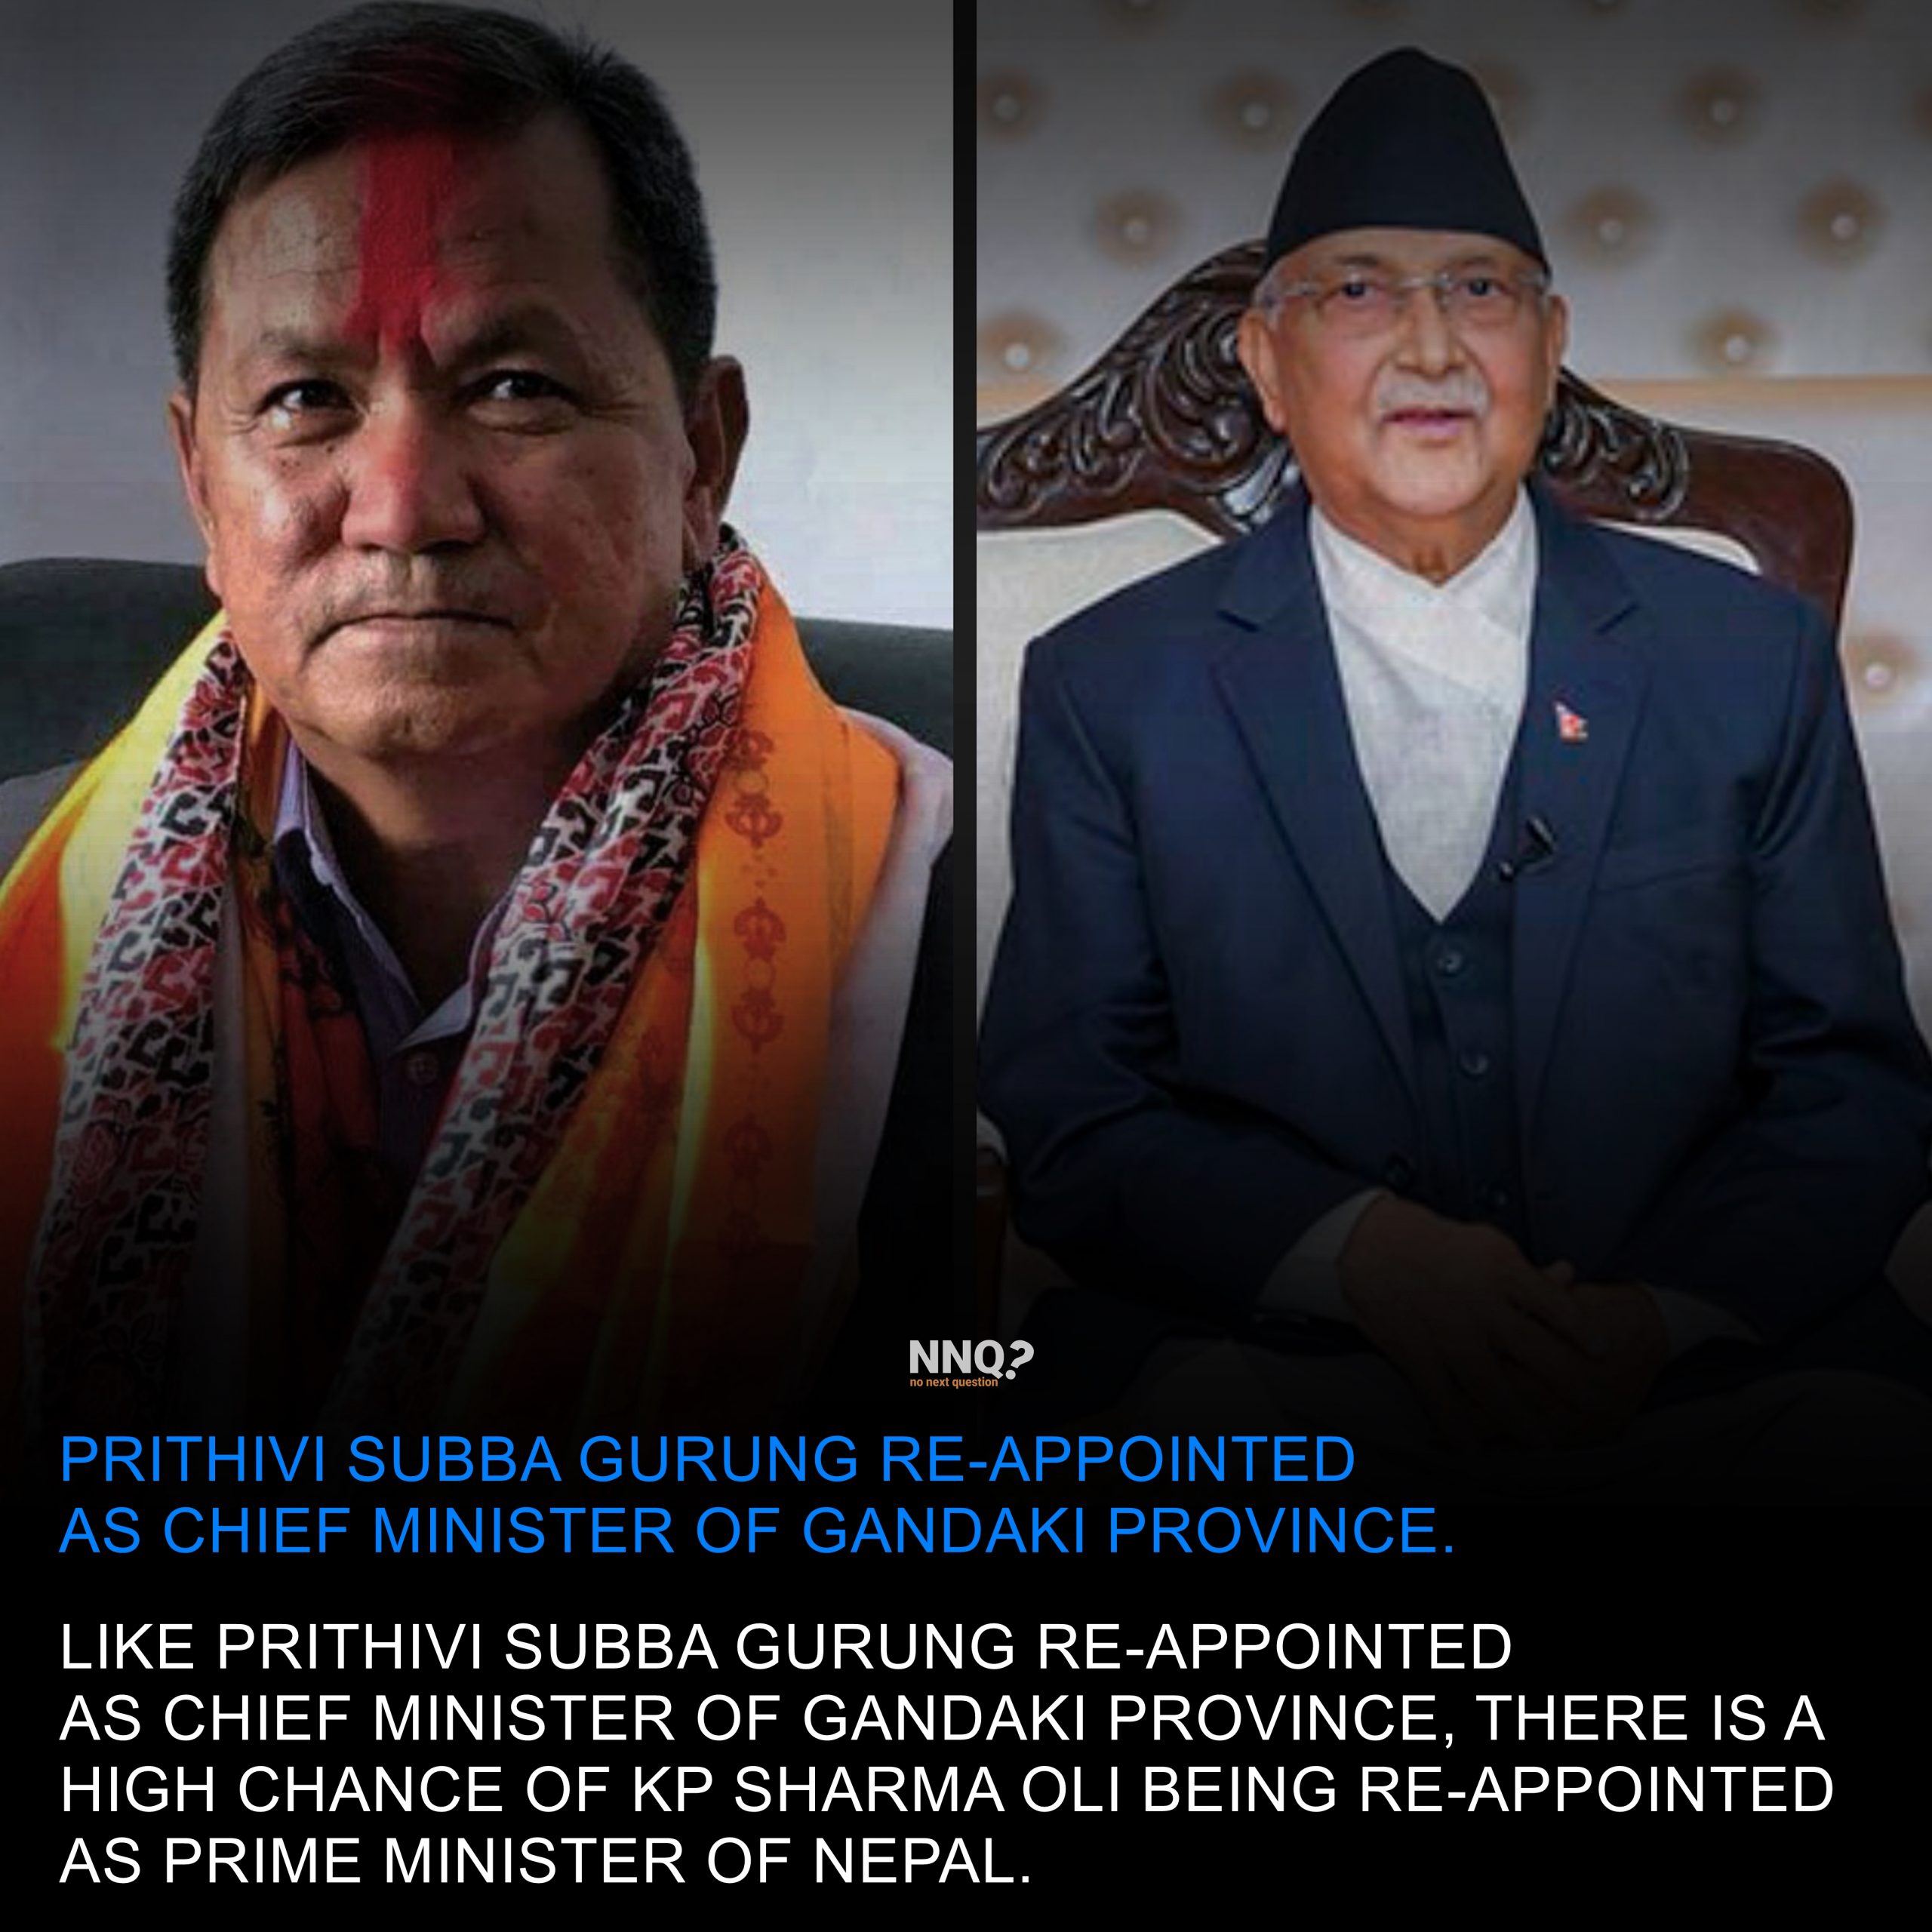 Prithivi Subba Gurung Re-Appointed as Chief Minister